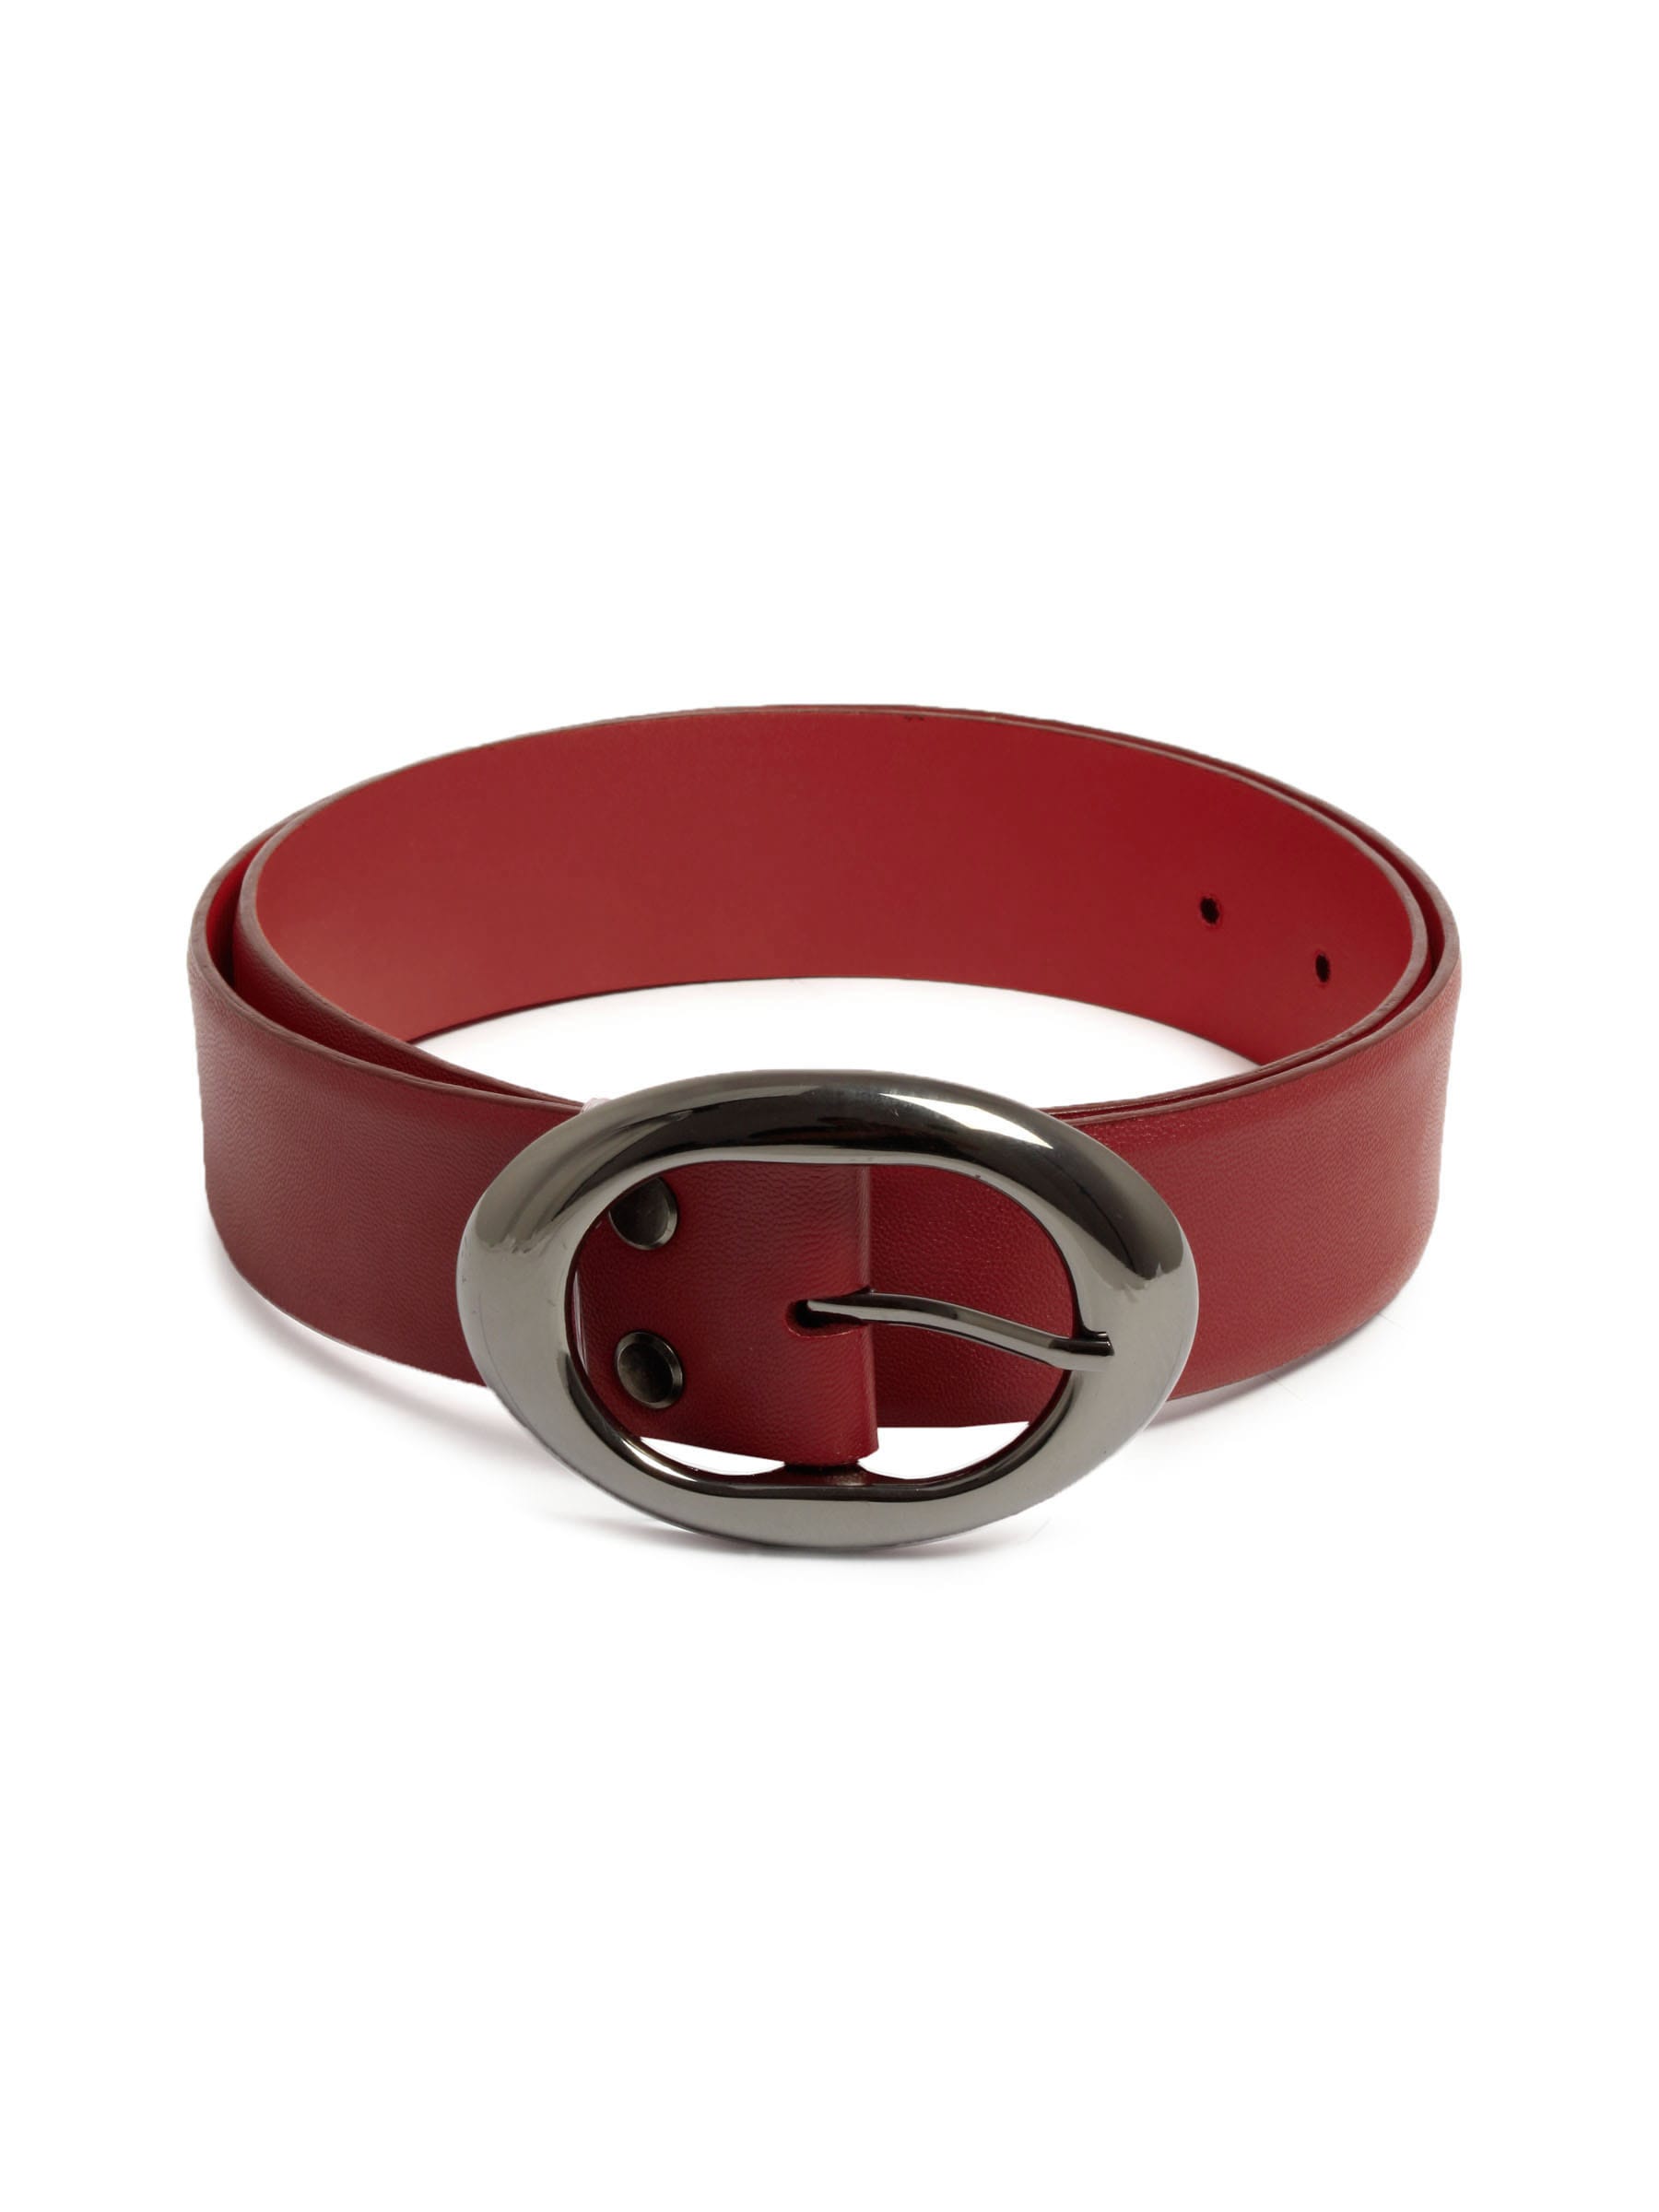 United Colors of Benetton Women Solid Red Belts